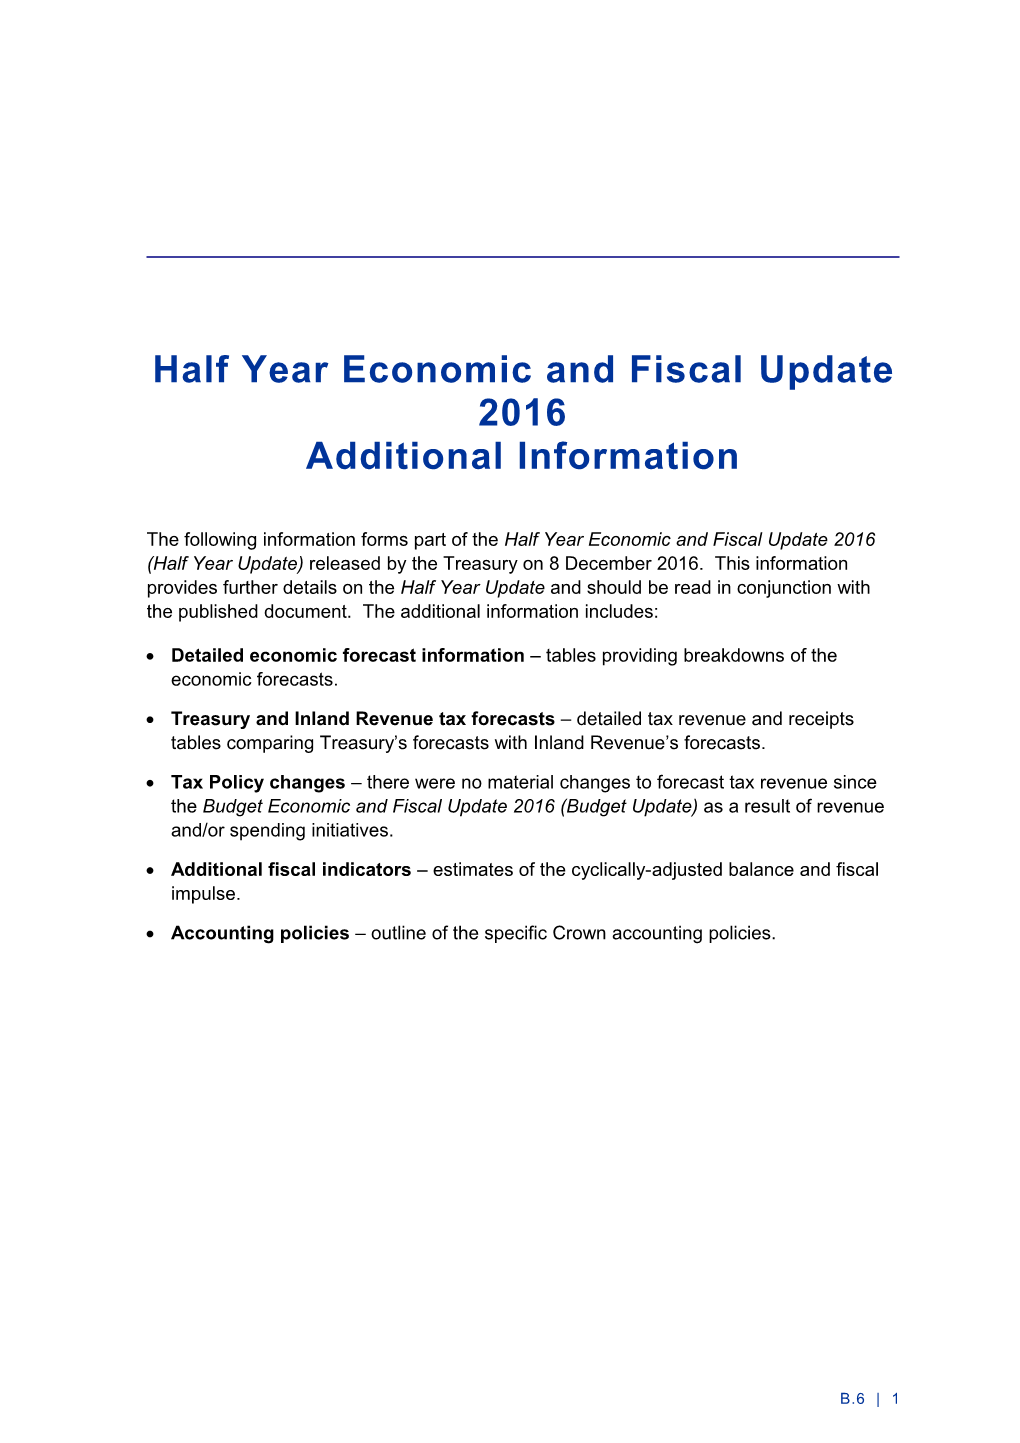 Additional Information - Half Year Economic and Fiscal Update 2016 - 8 December 2016